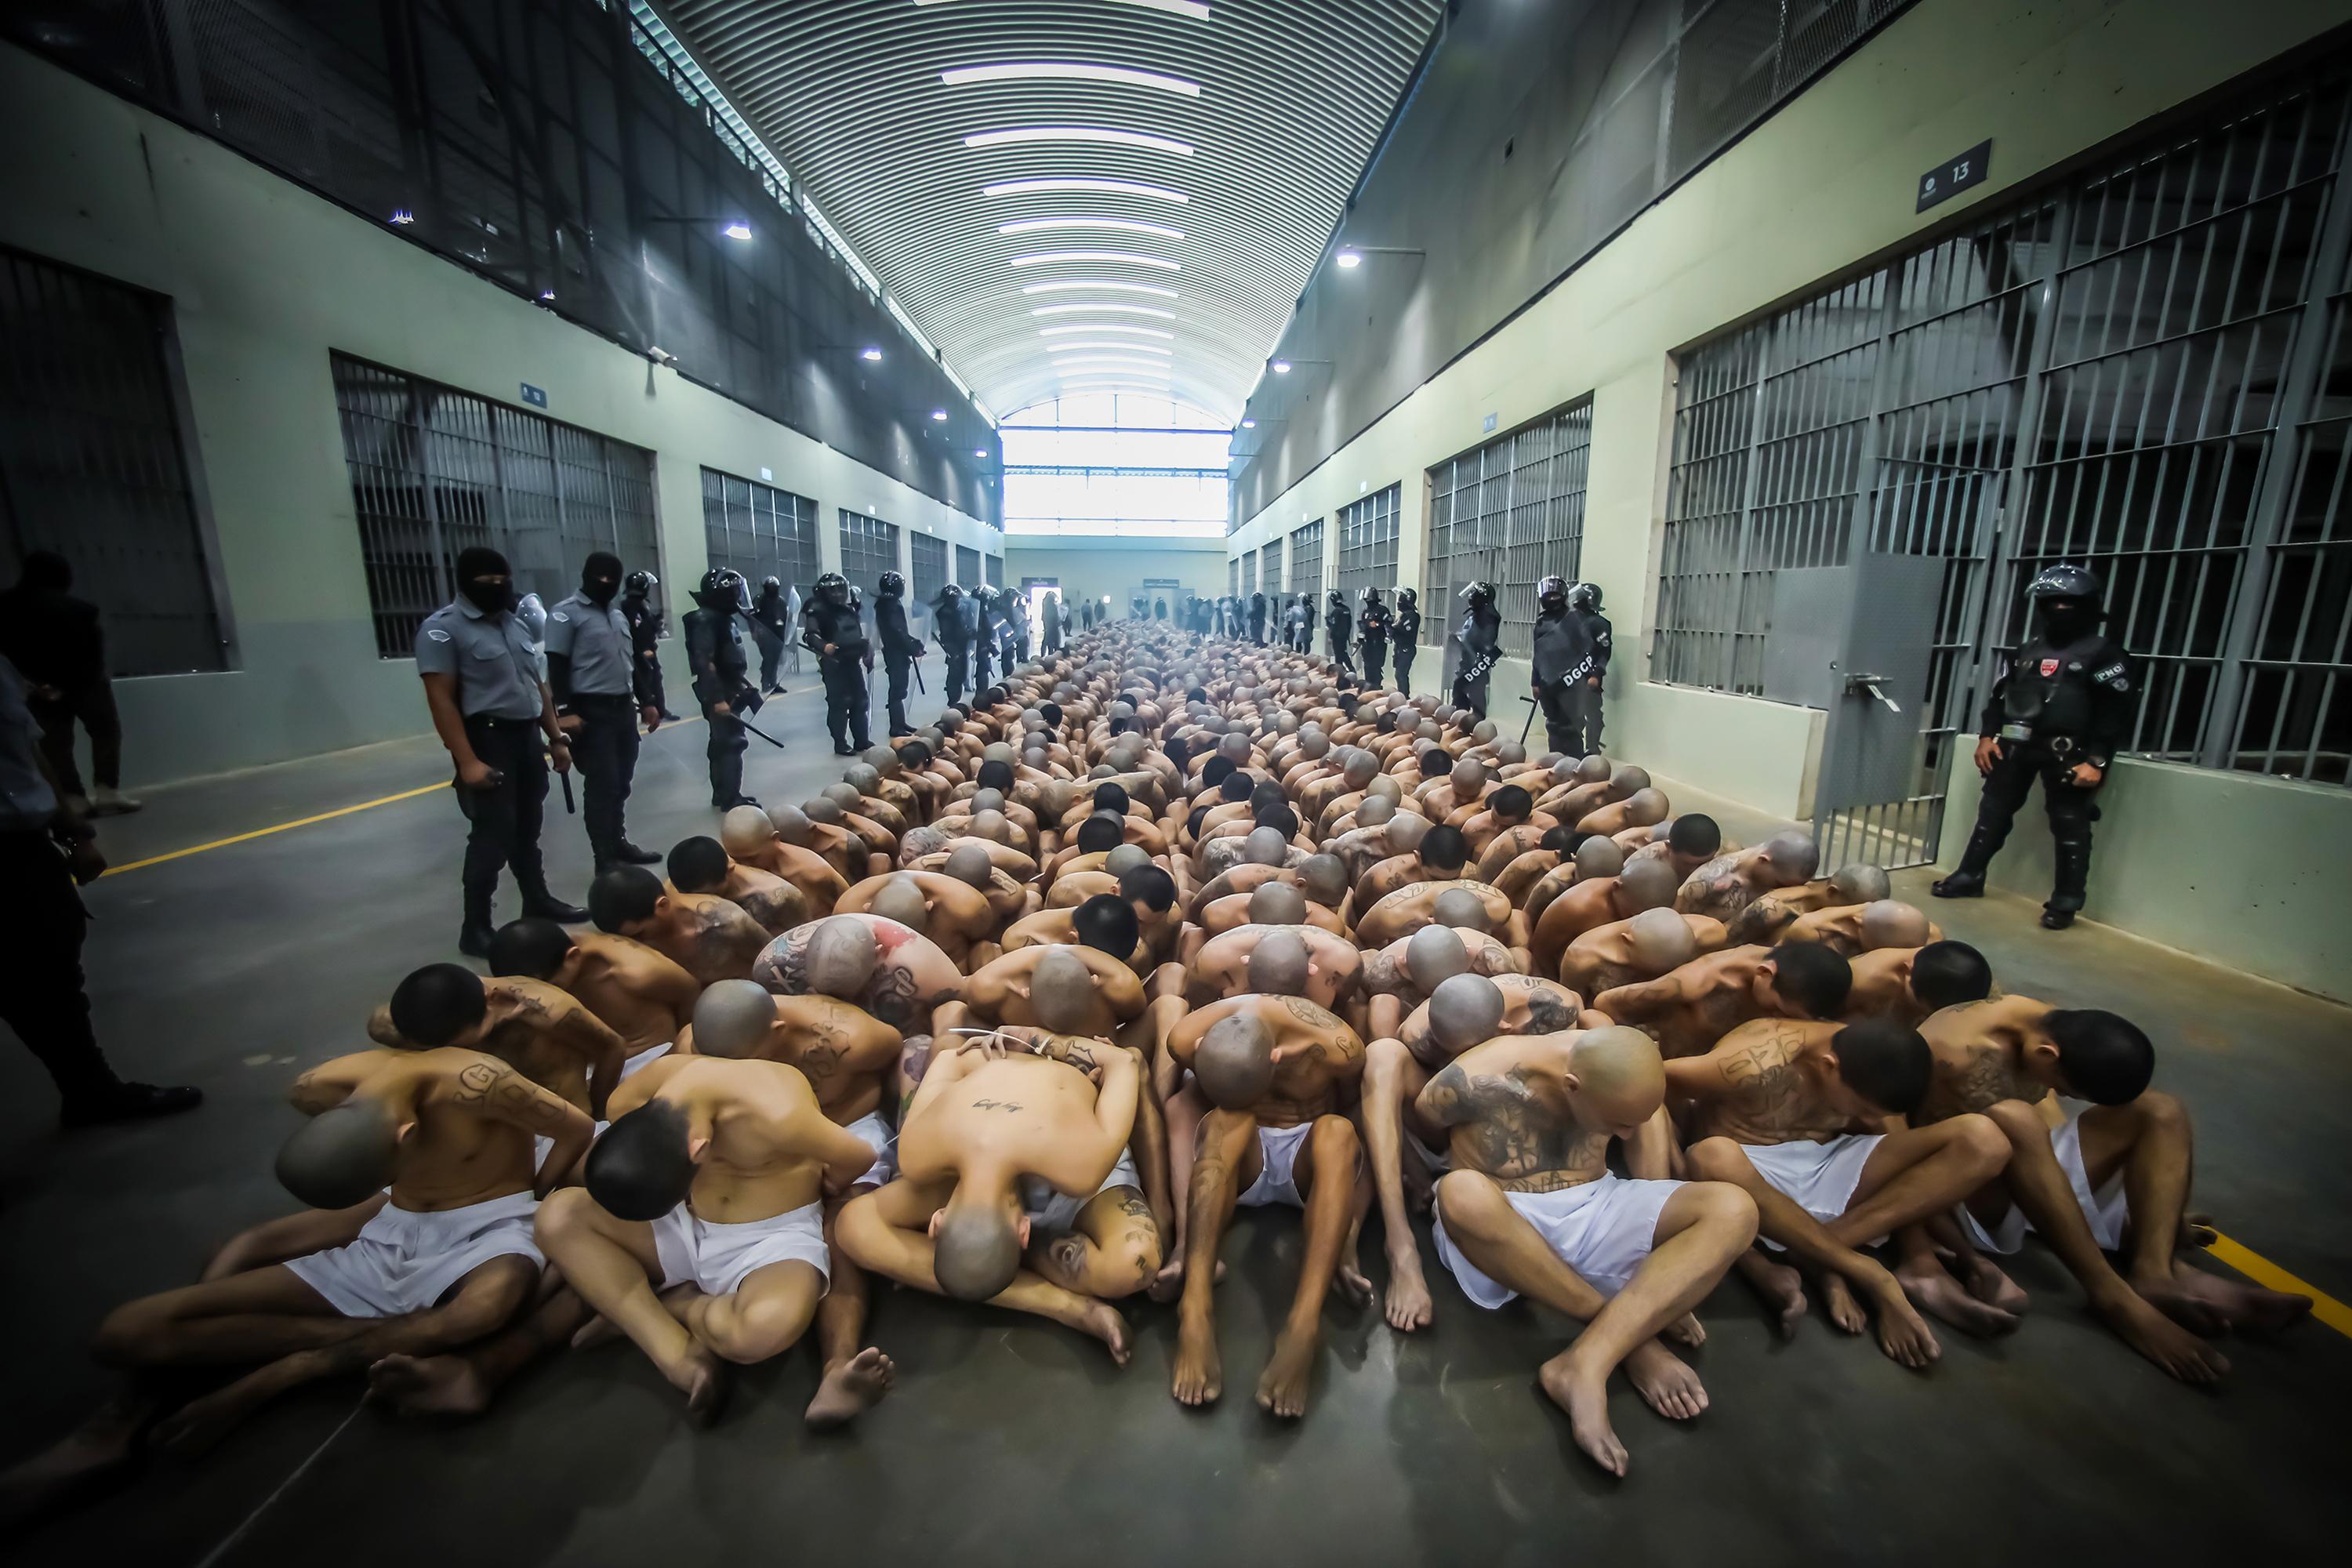 On Friday, February 24, 2023, the Salvadoran government transferred 2,000 prisoners to the newly constructed Confinement Center for Terrorism (CECOT) outside Tecoluca, San Vicente. Photo: Press Secretariat